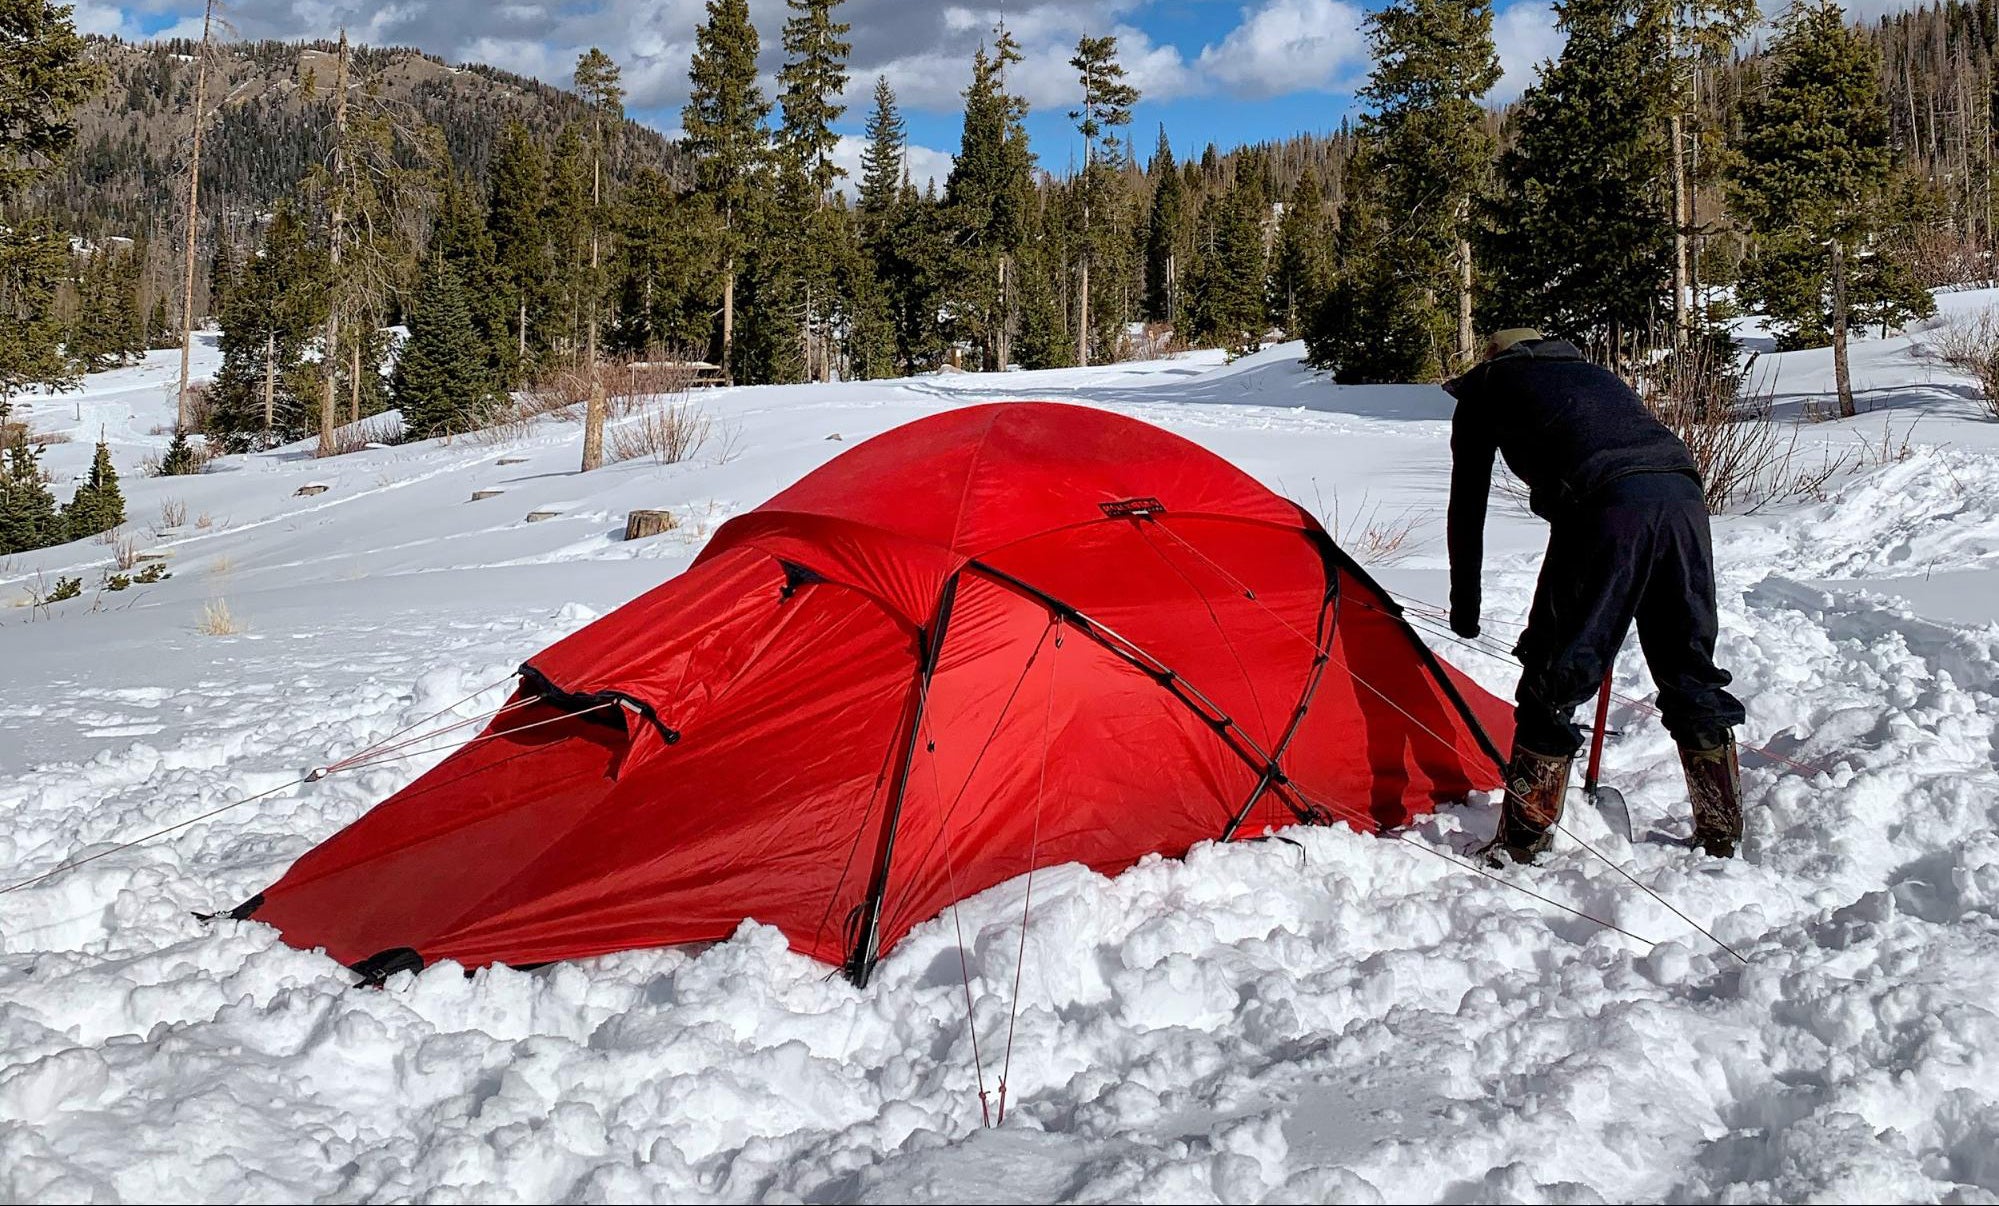 Trip Notes: Winter Camping in Southwest Colorado